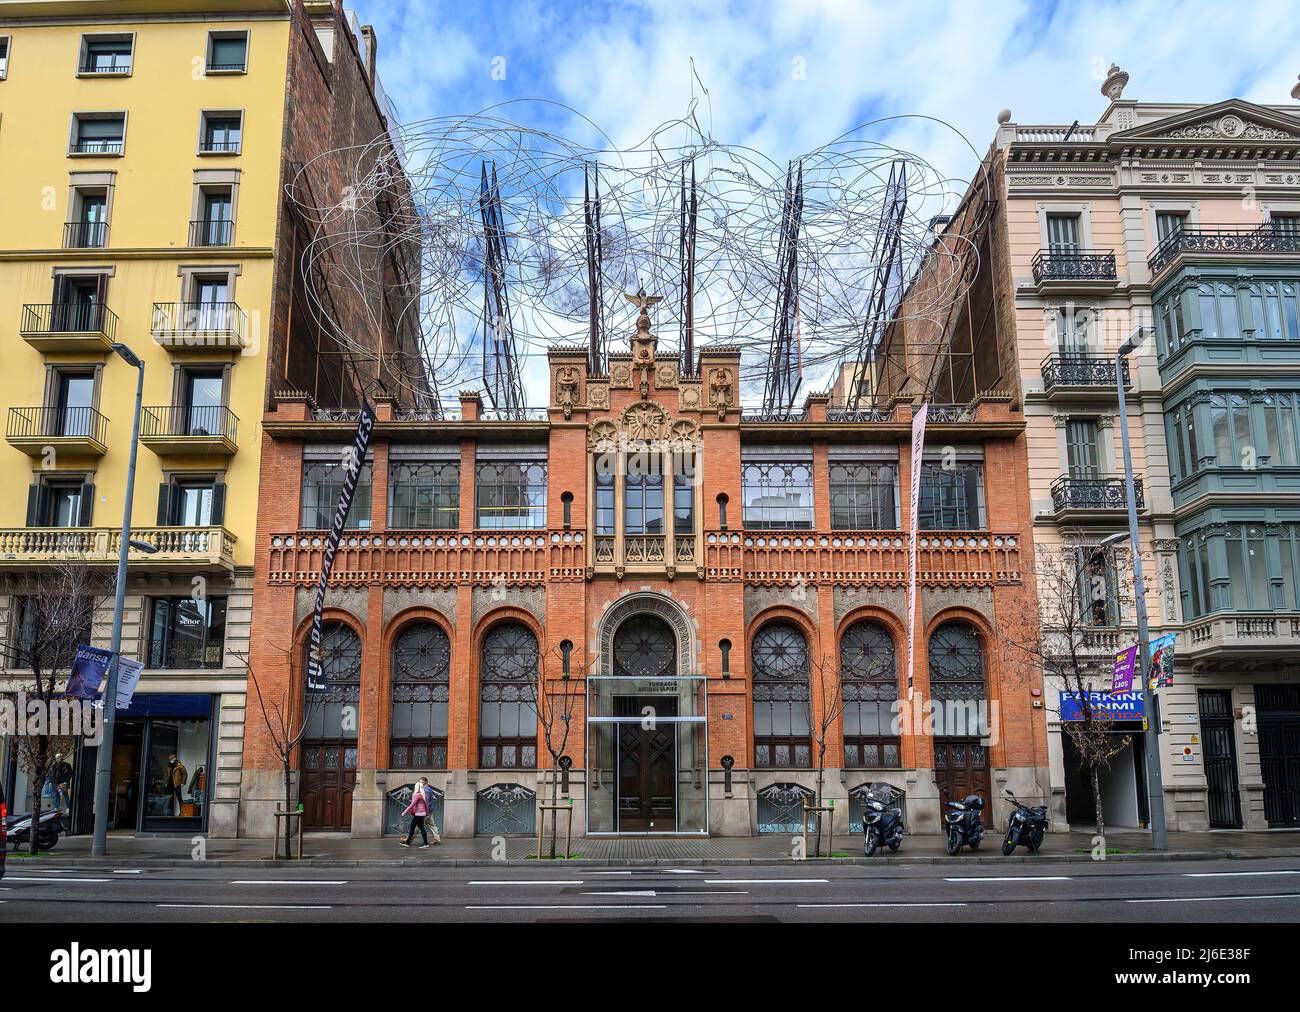 Barcelona, Spain. View of the Fundacio Antoni Tapies foundation, a cultural  center and museum located in Arago Street build by Domenech i Montaner  Stock Photo - Alamy